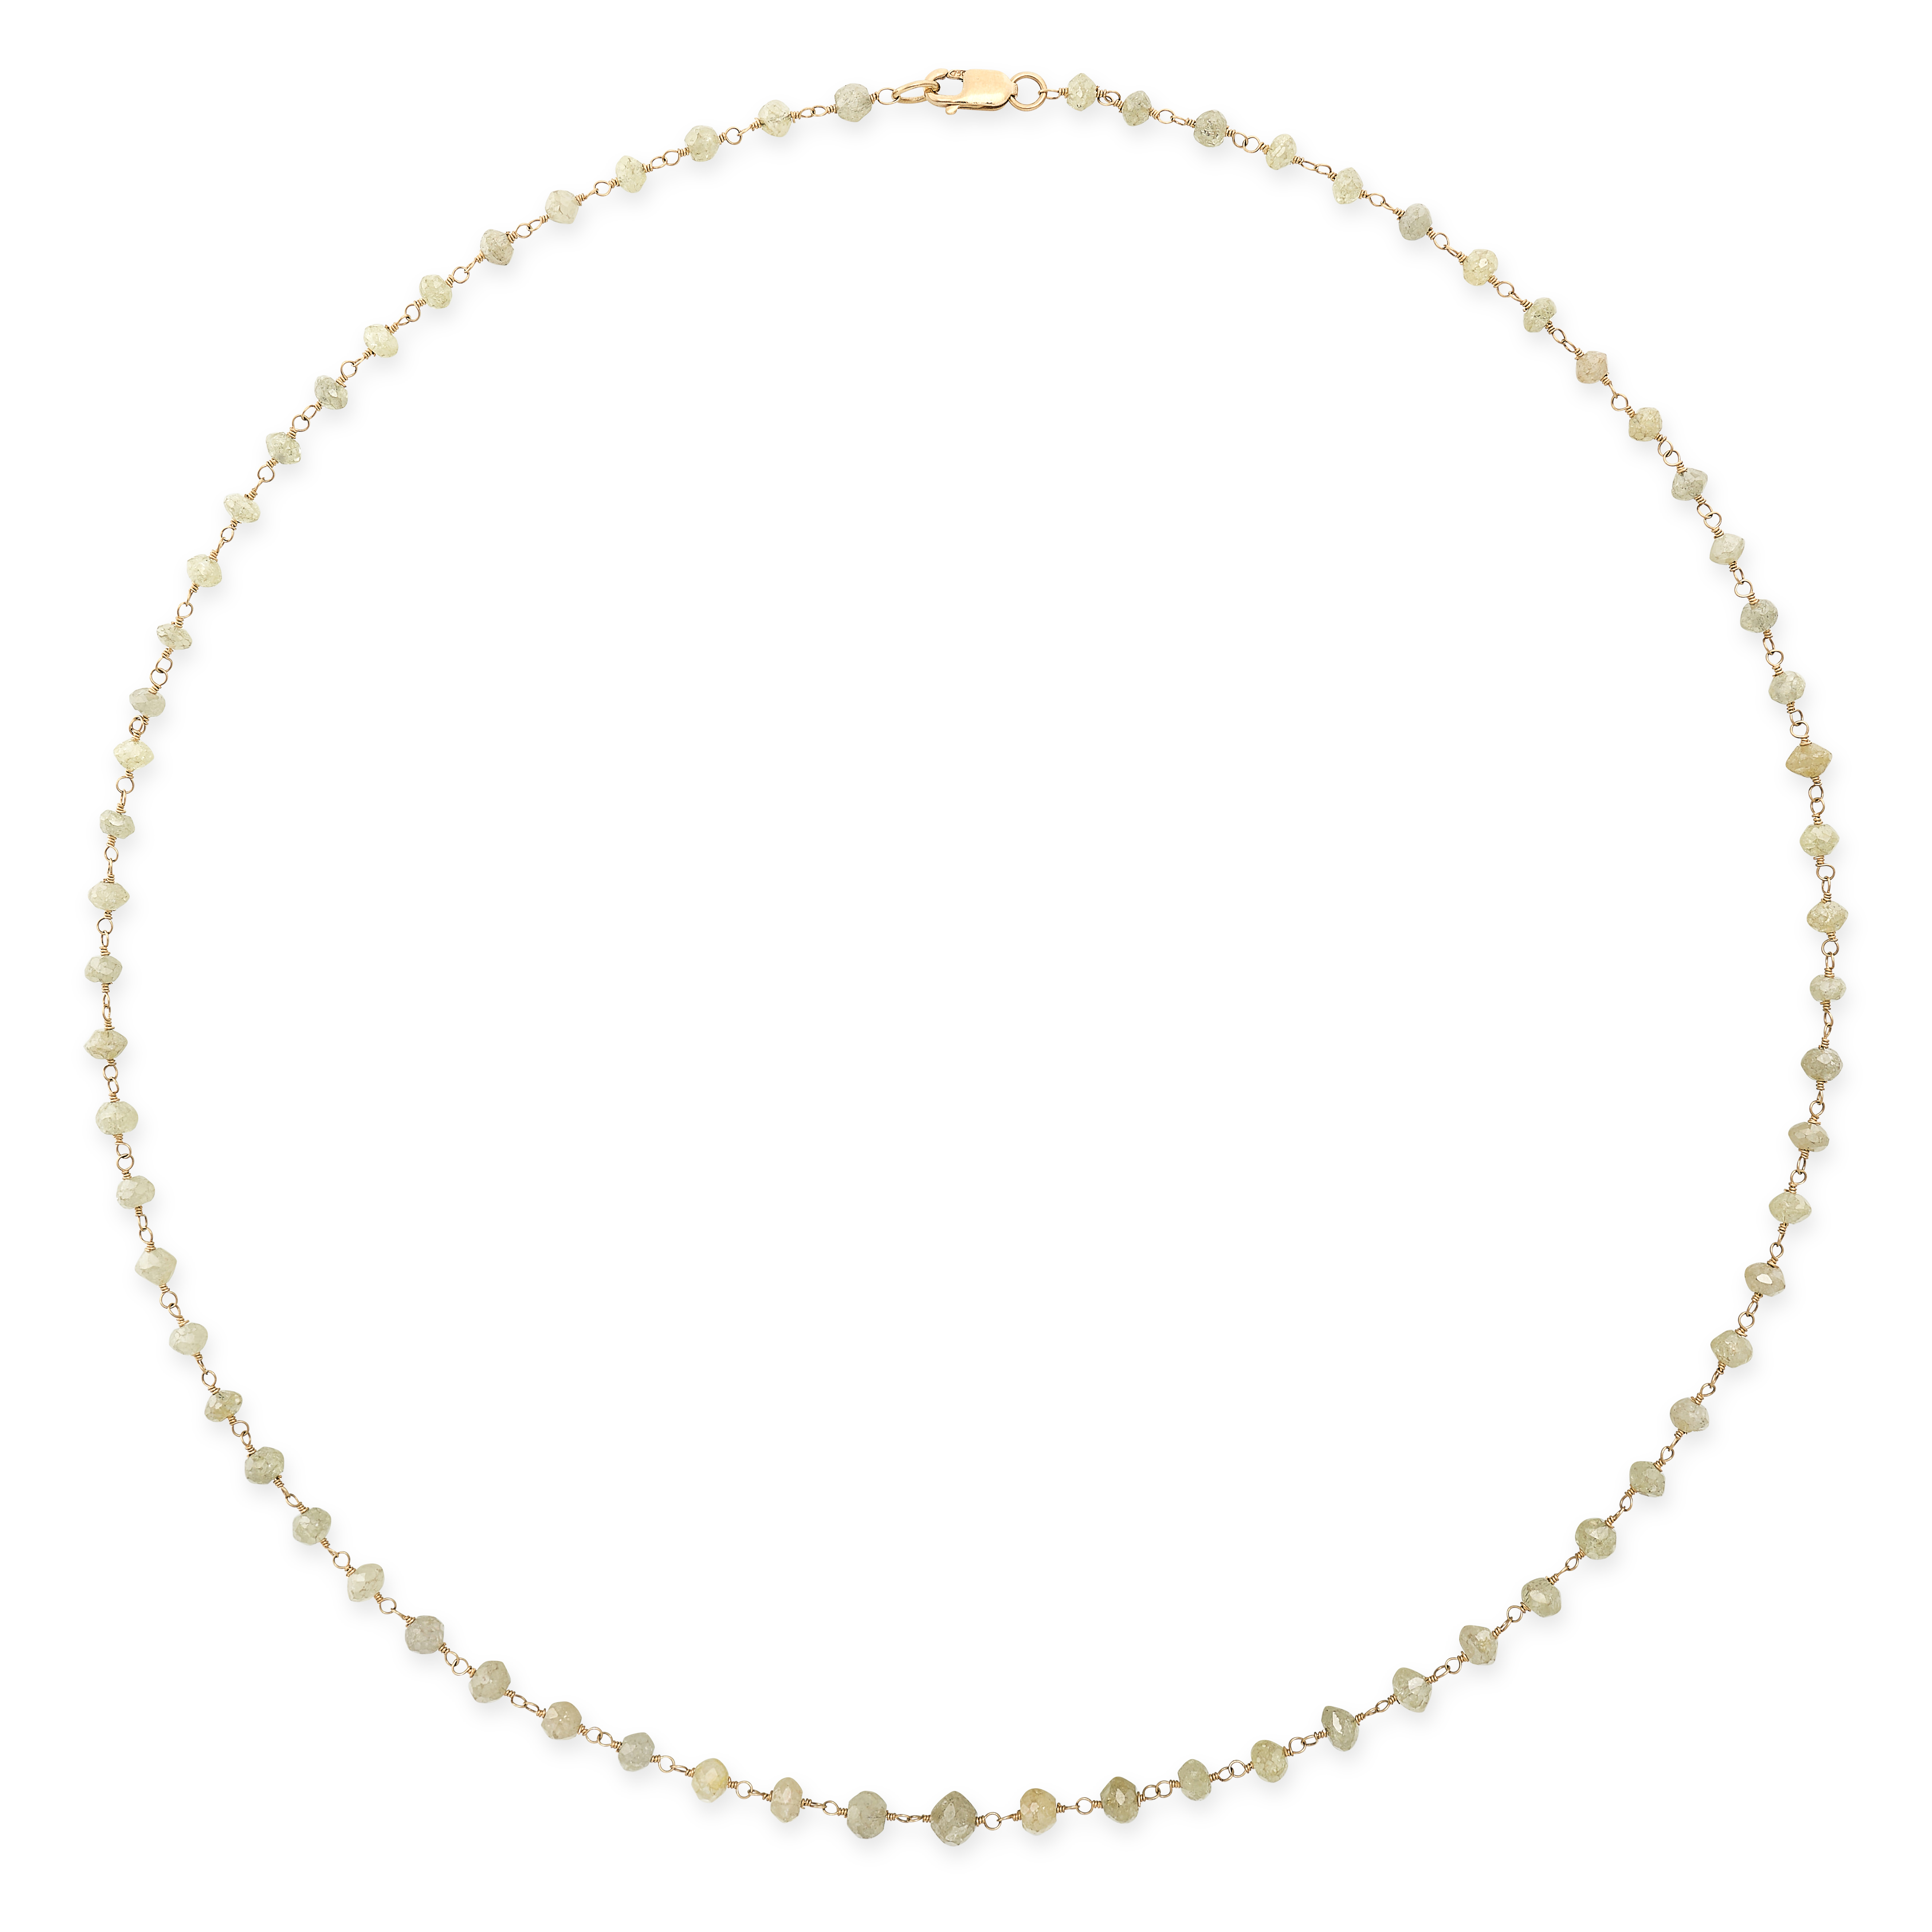 A FANCY YELLOW DIAMOND BEAD NECKLACE comprising a single row of faceted yellow diamond beads to w...